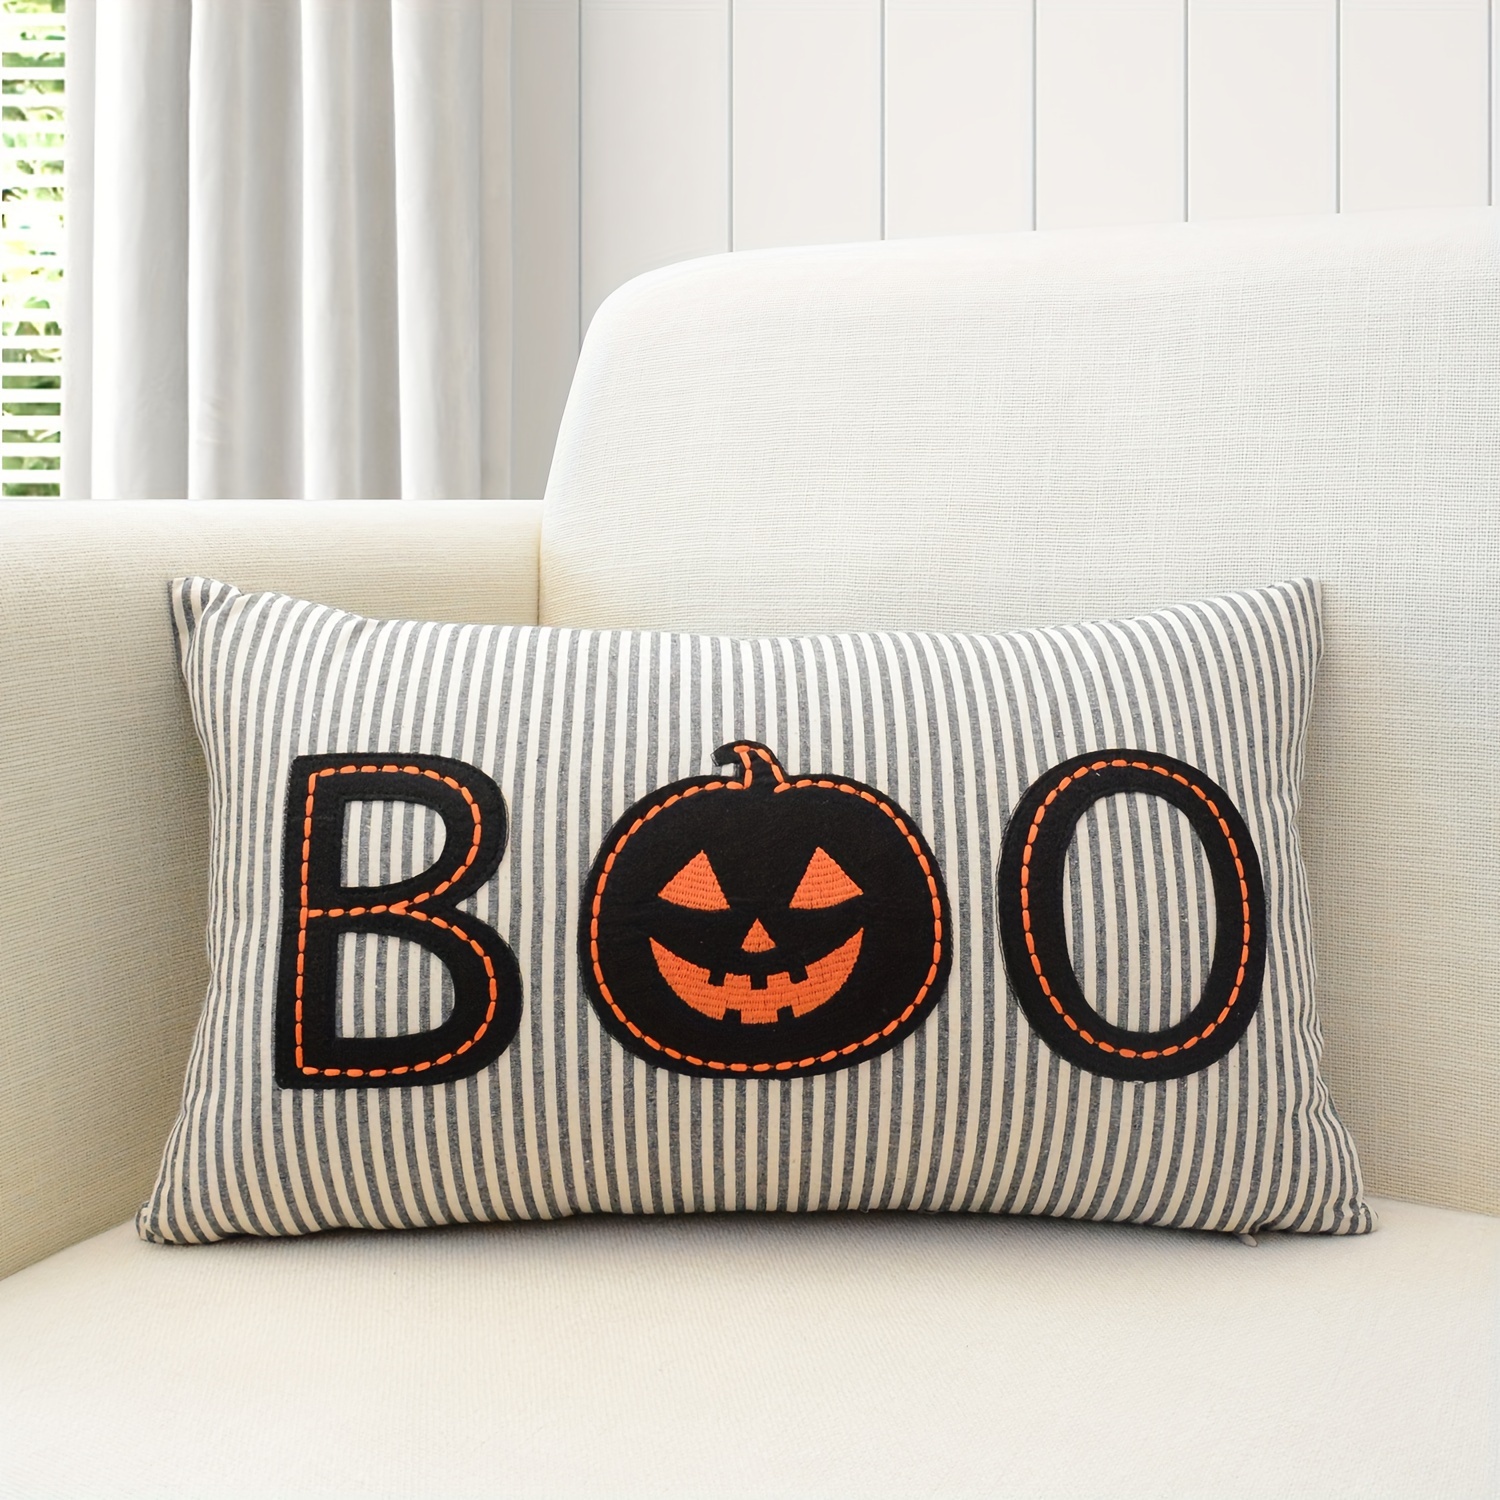 

Halloween-themed Embroidered Letter Throw Pillow Cover, Machine Washable Polyester, Zip Closure - Perfect For Home Decor